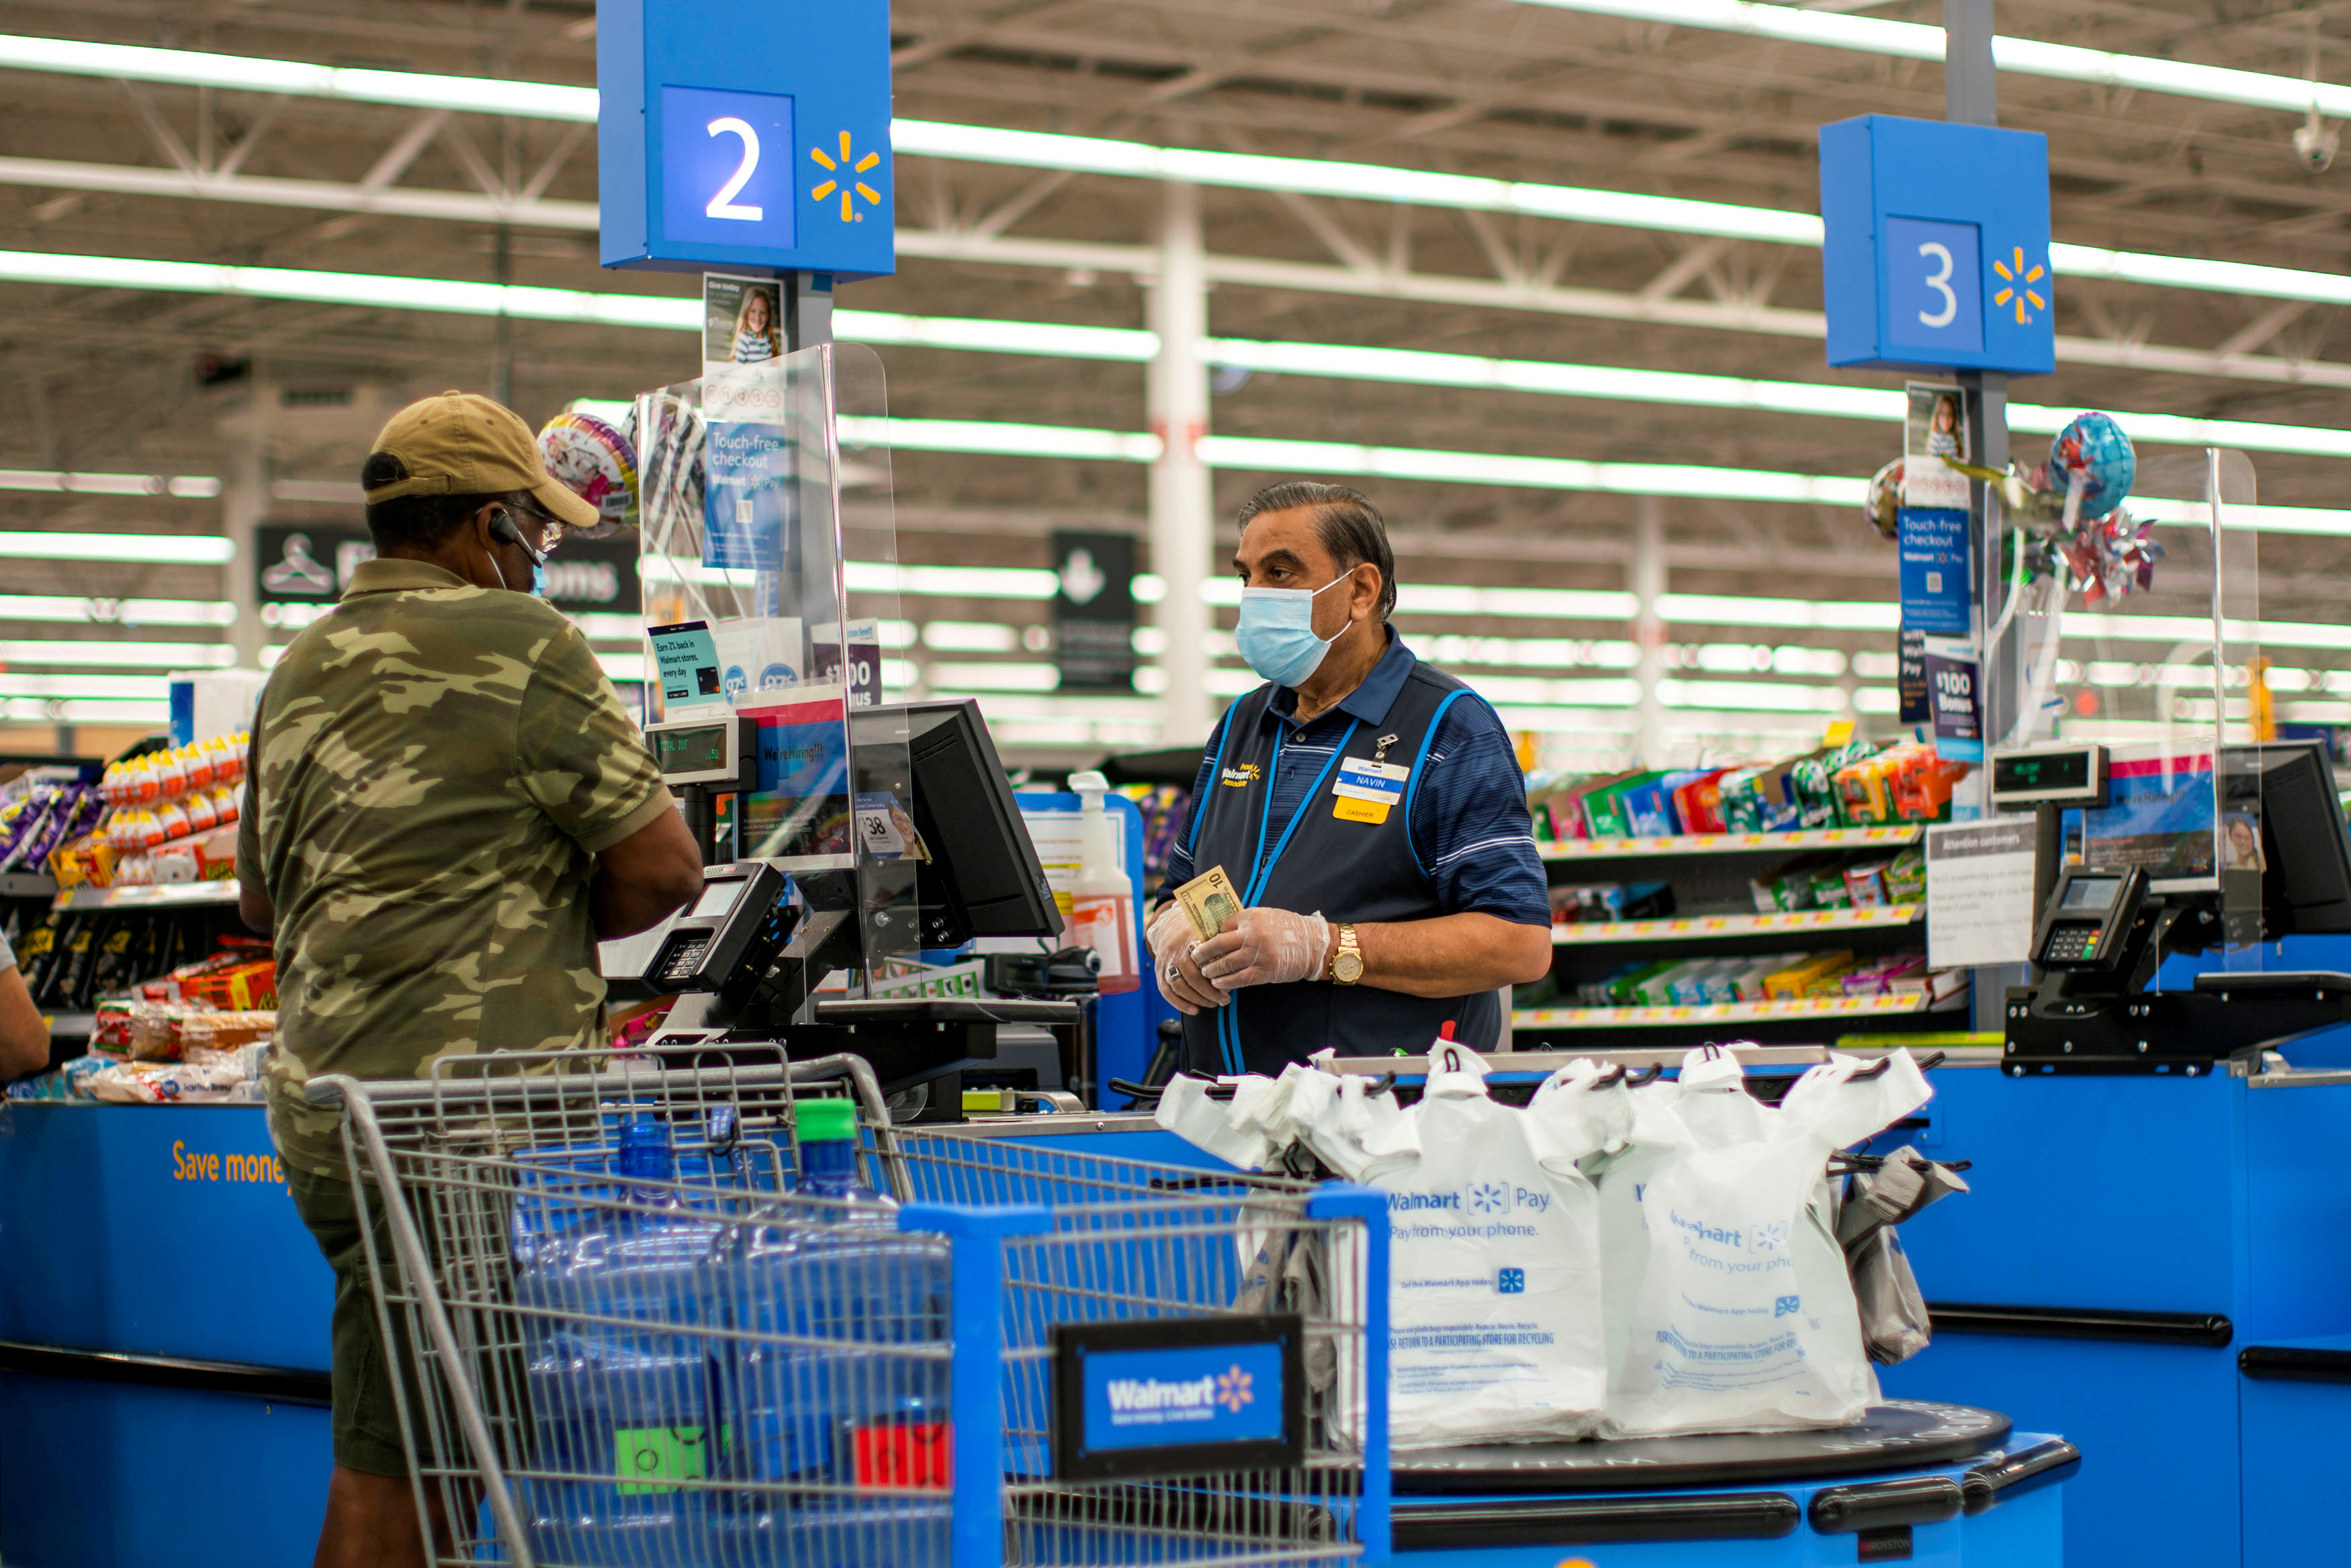 FILE PHOTO: A worker and a shopper are seen wearing masks at a Walmart store, in North Brunswick, New Jersey